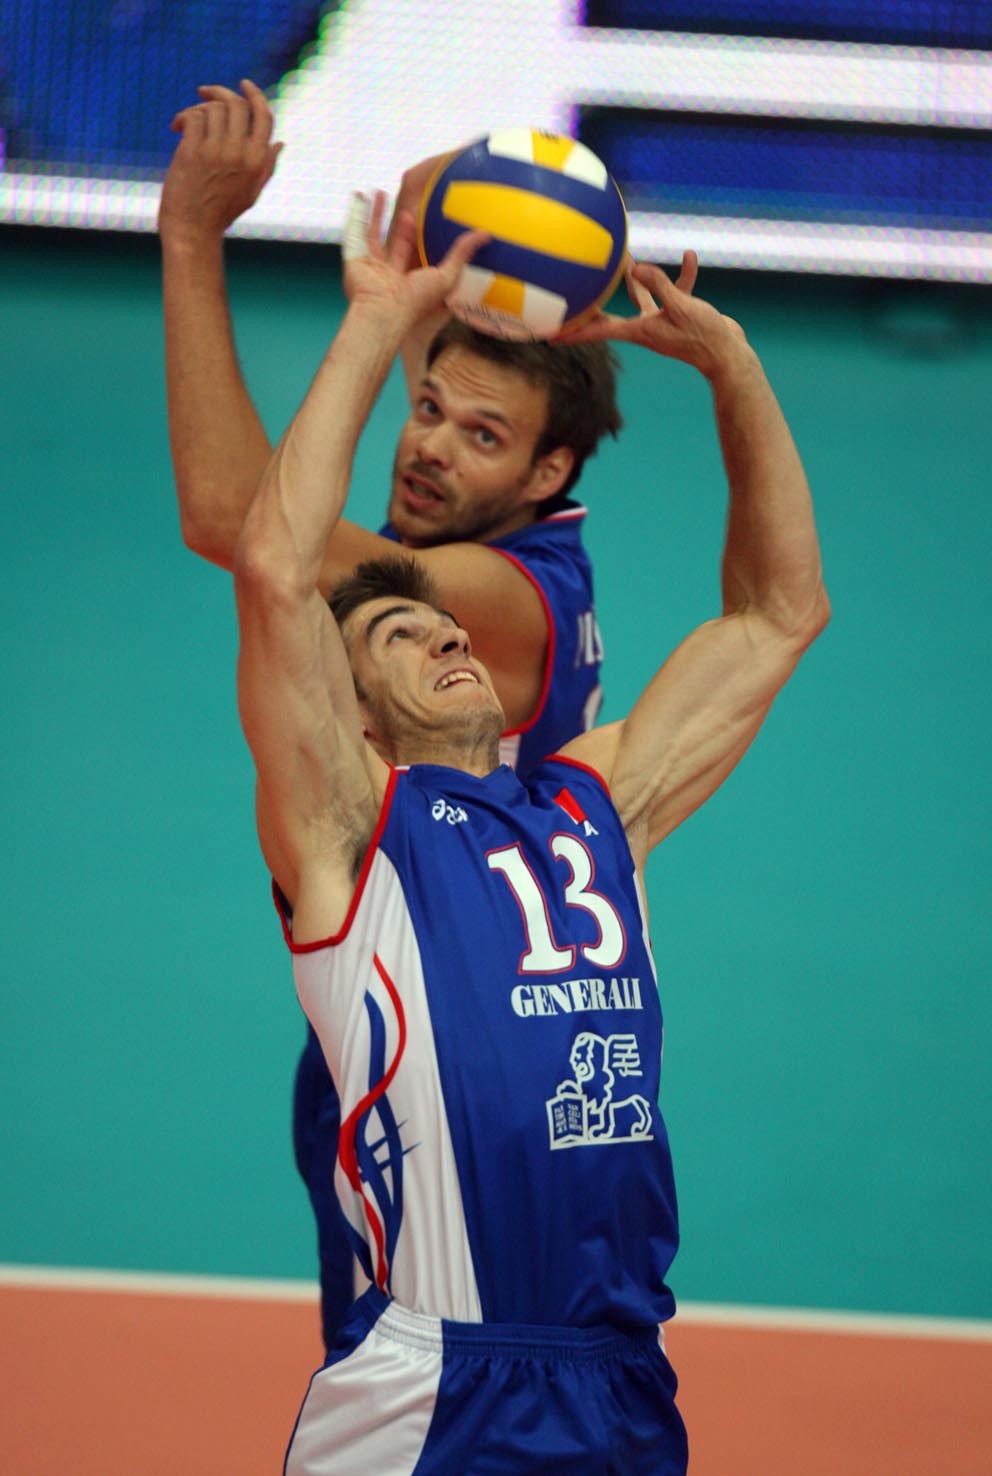 pierre pujol france volleyball setter 5